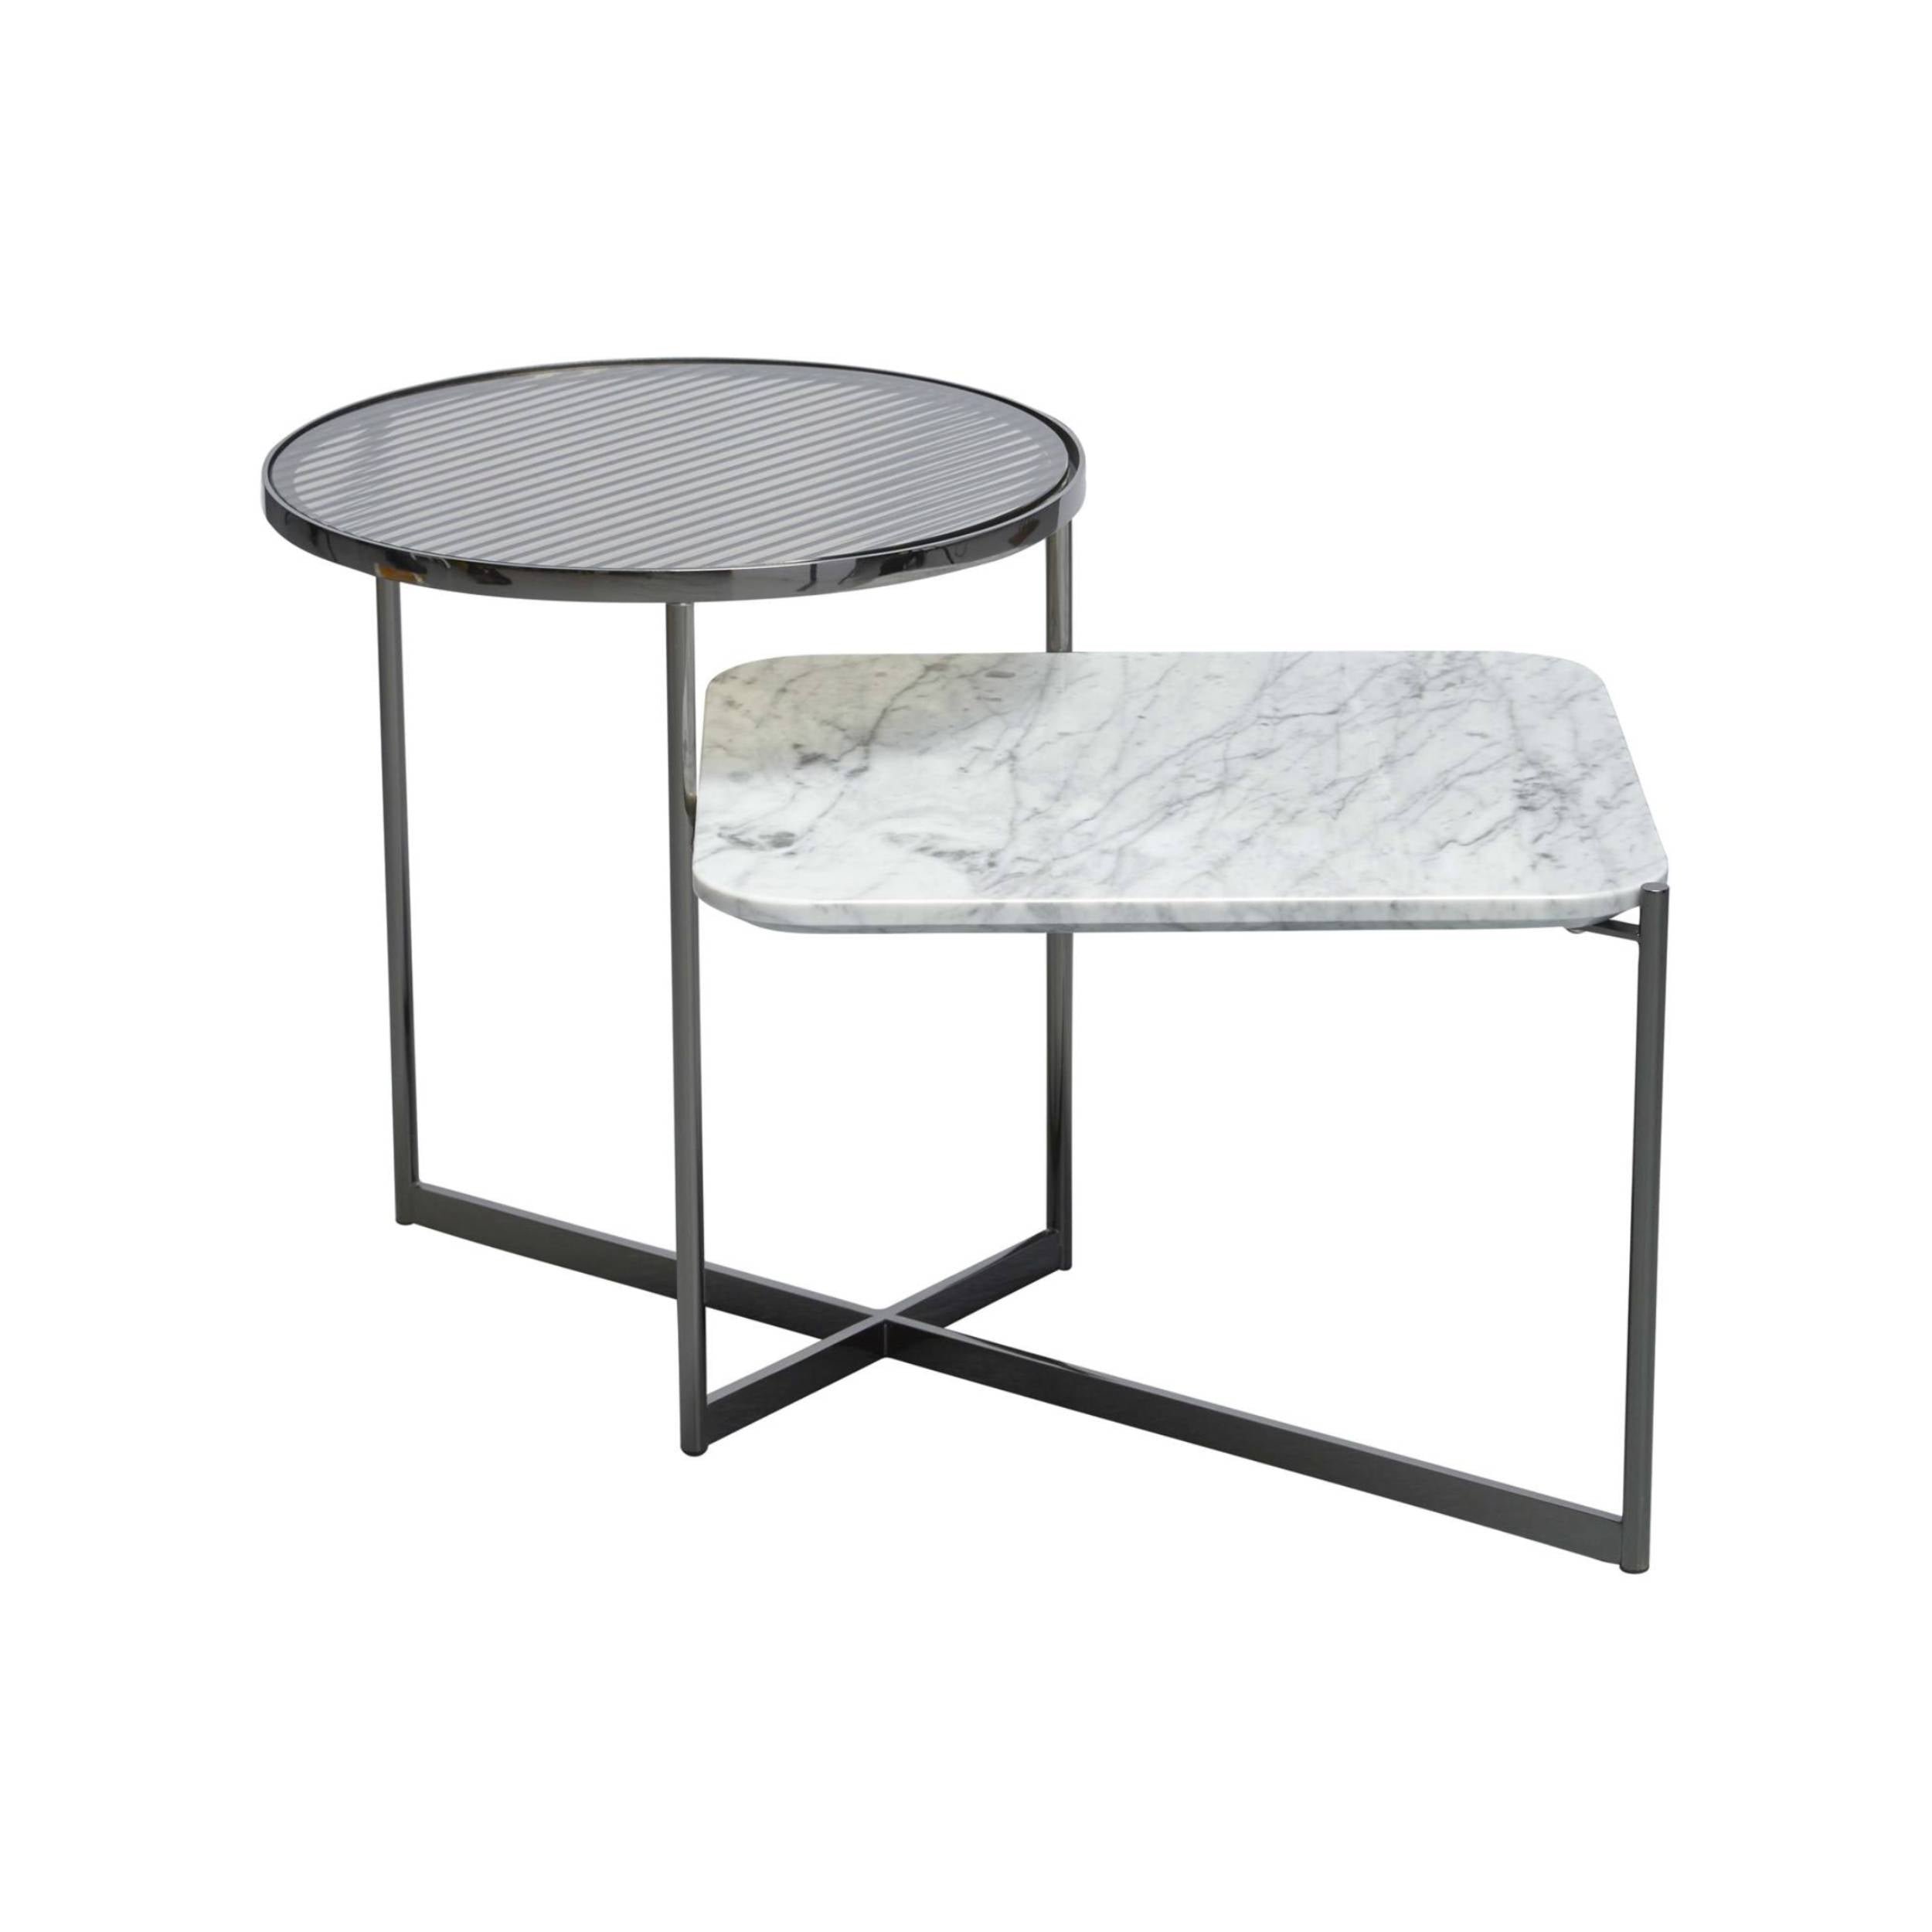 Featured image of post Black Marble And Glass Coffee Table / Popular glass marble table products: